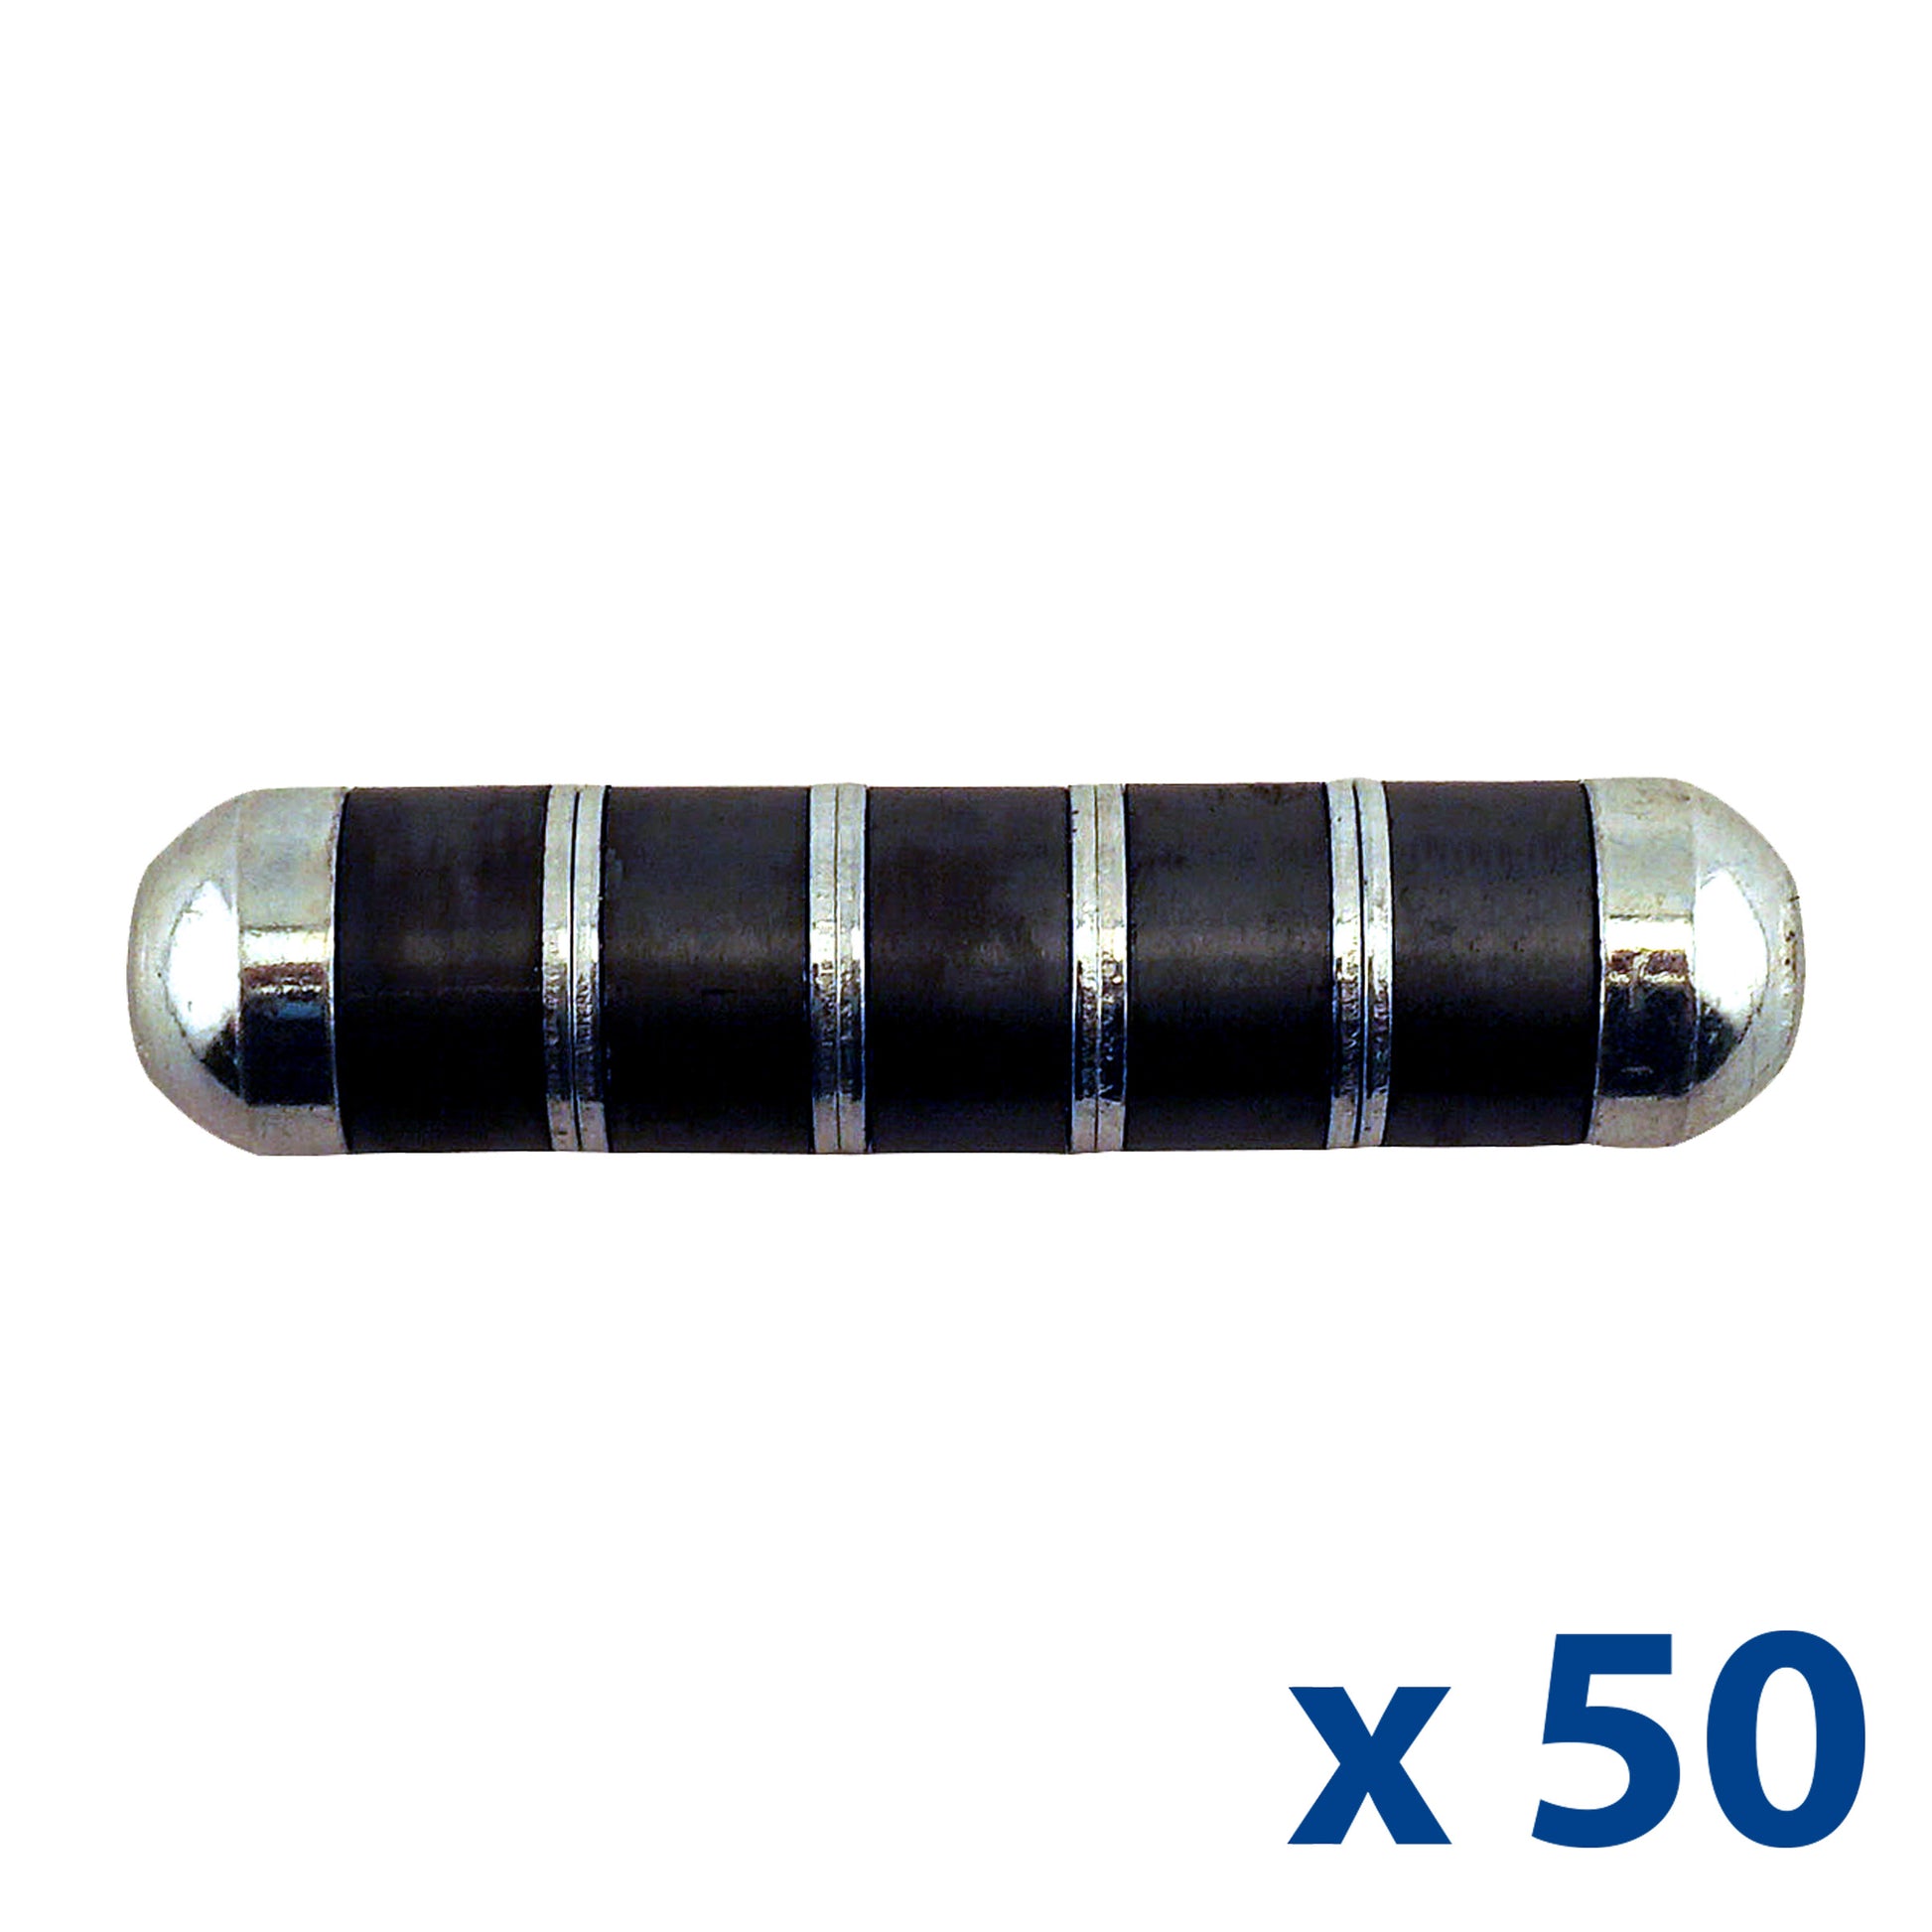 Load image into Gallery viewer, COW-RUM5CX50BX Heavy-Duty Ru-Master 5™ Cow Magnets (50pk) - Specifications